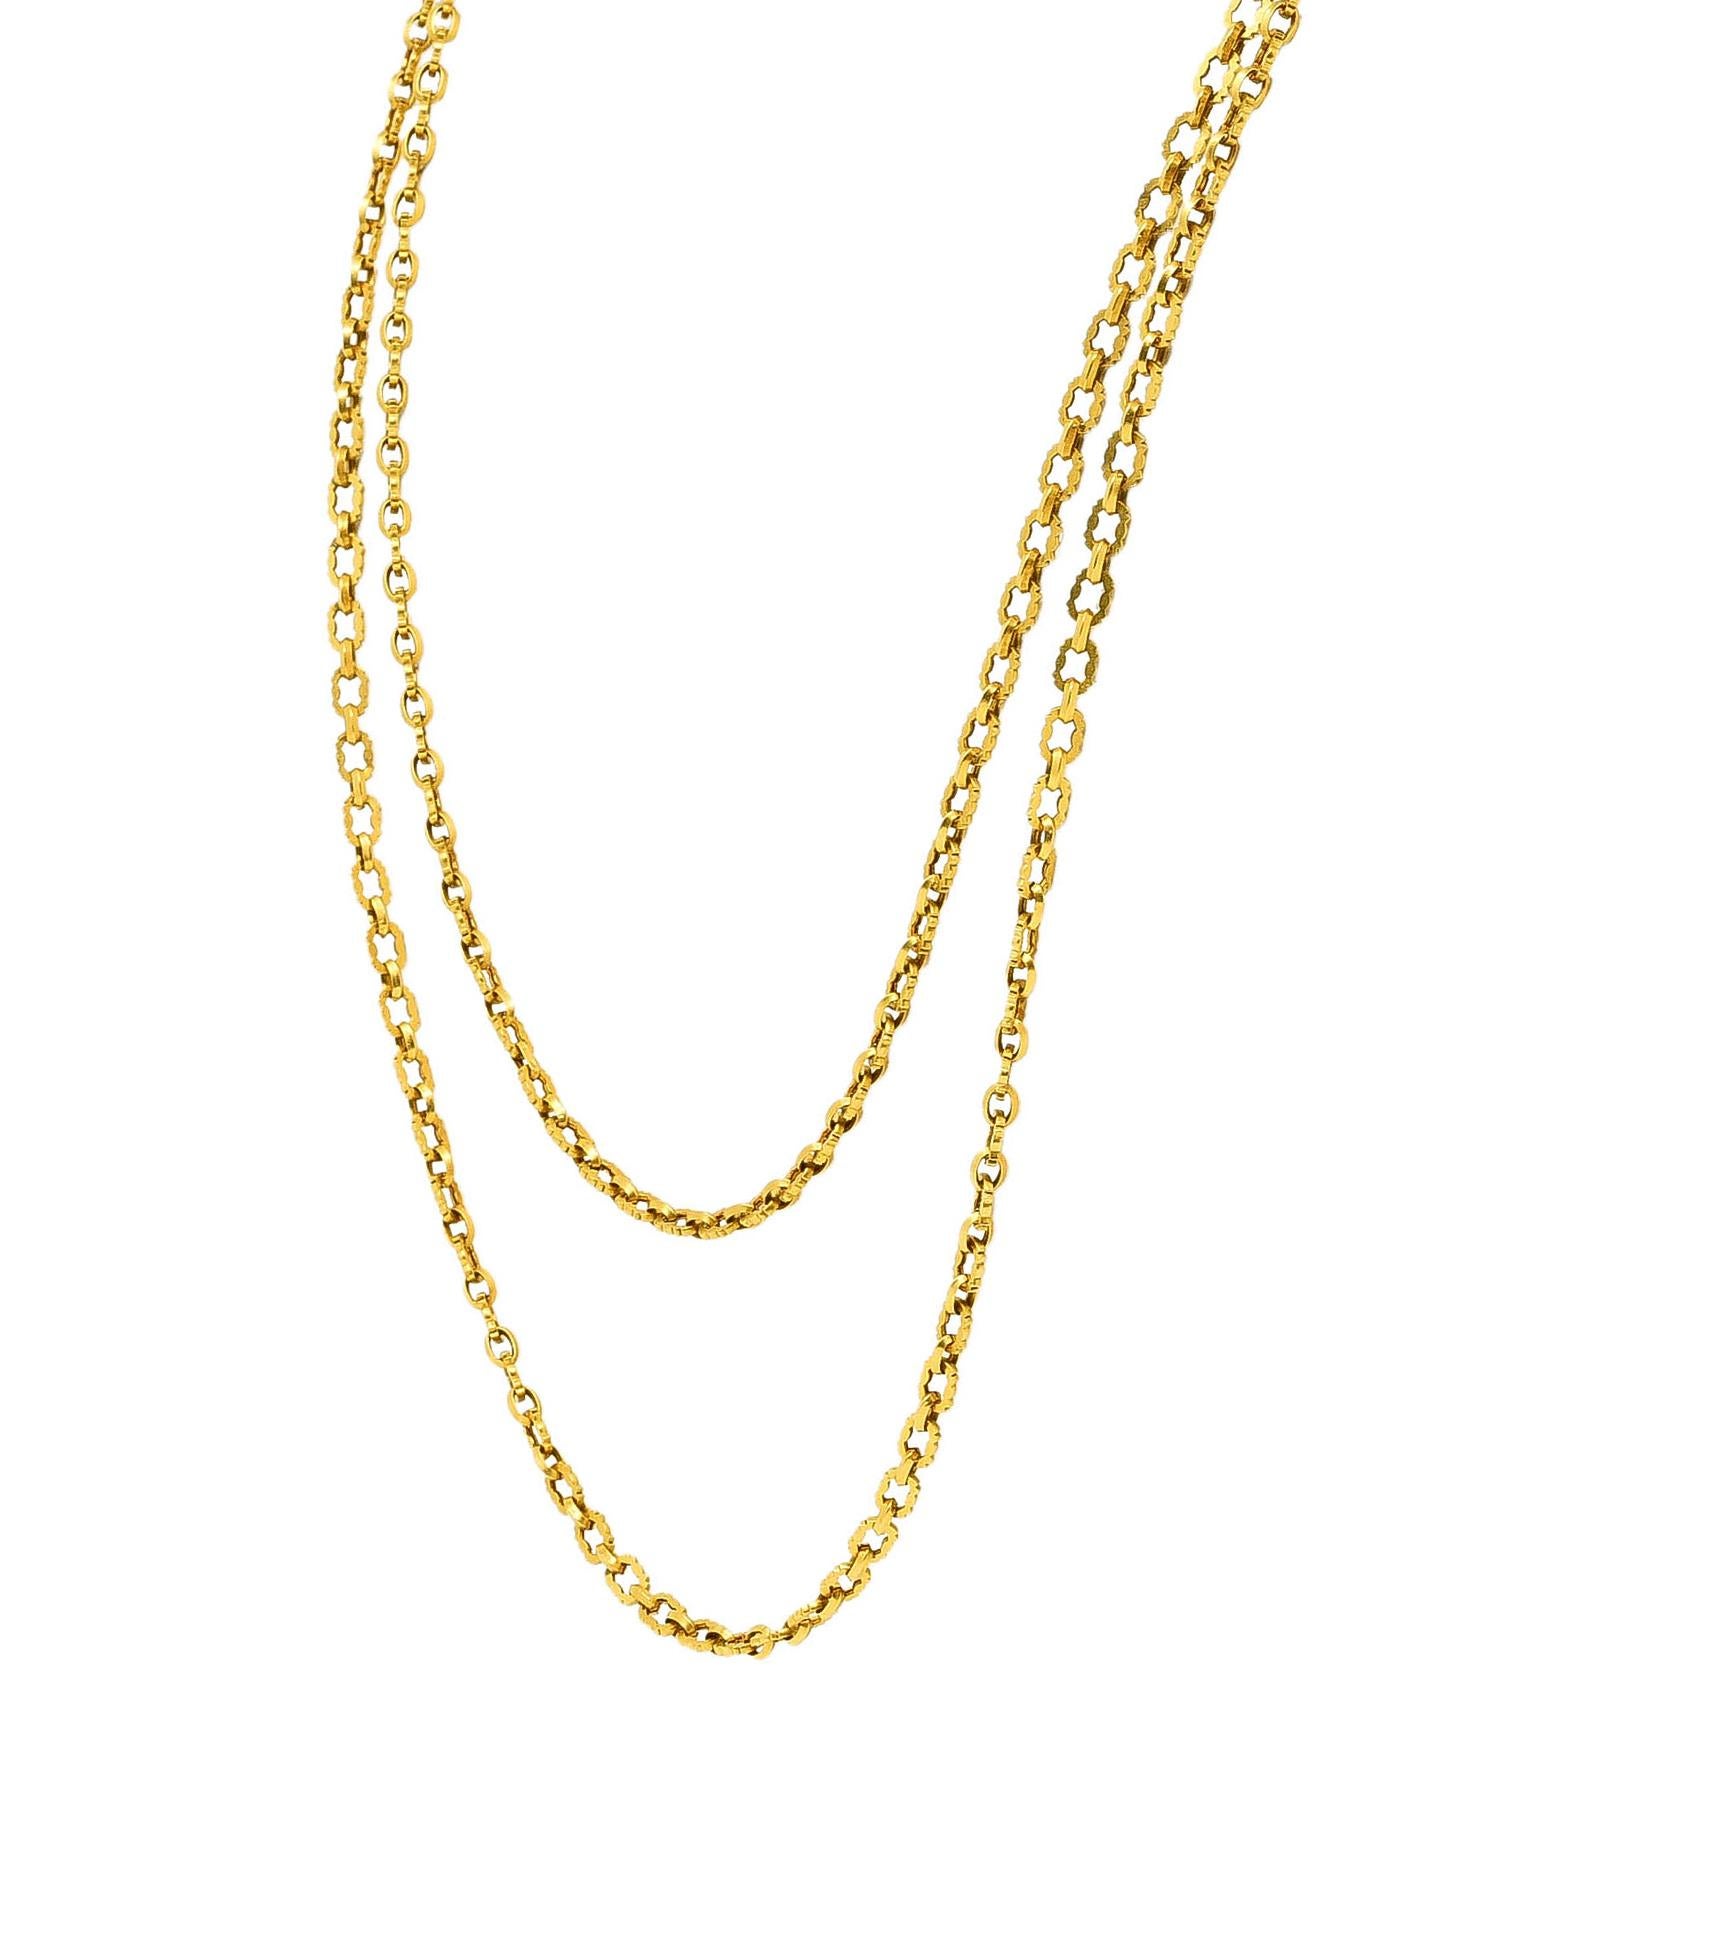 Women's or Men's Victorian French 18 Karat Yellow Gold 58 Inch Long Chain Necklace